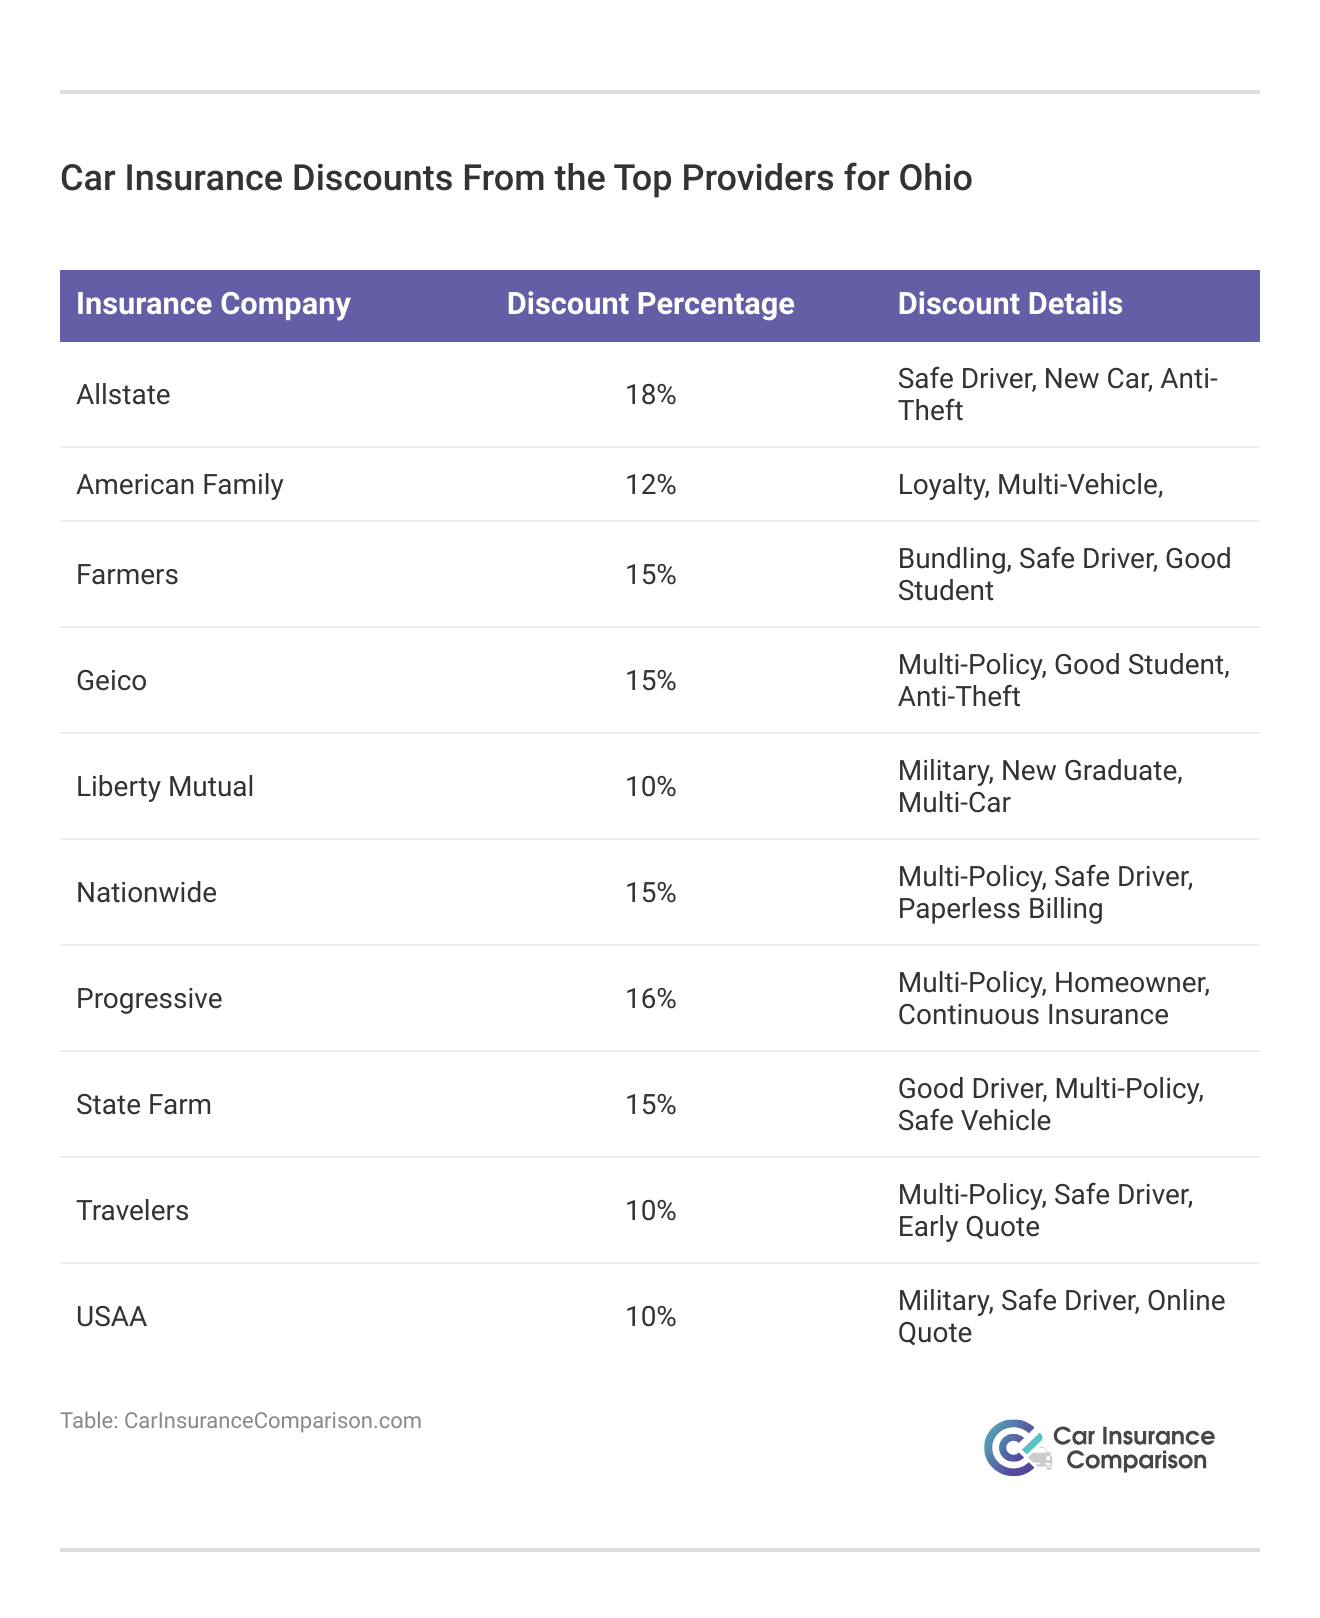 <h3>Car Insurance Discounts From the Top Providers for Ohio</h3>